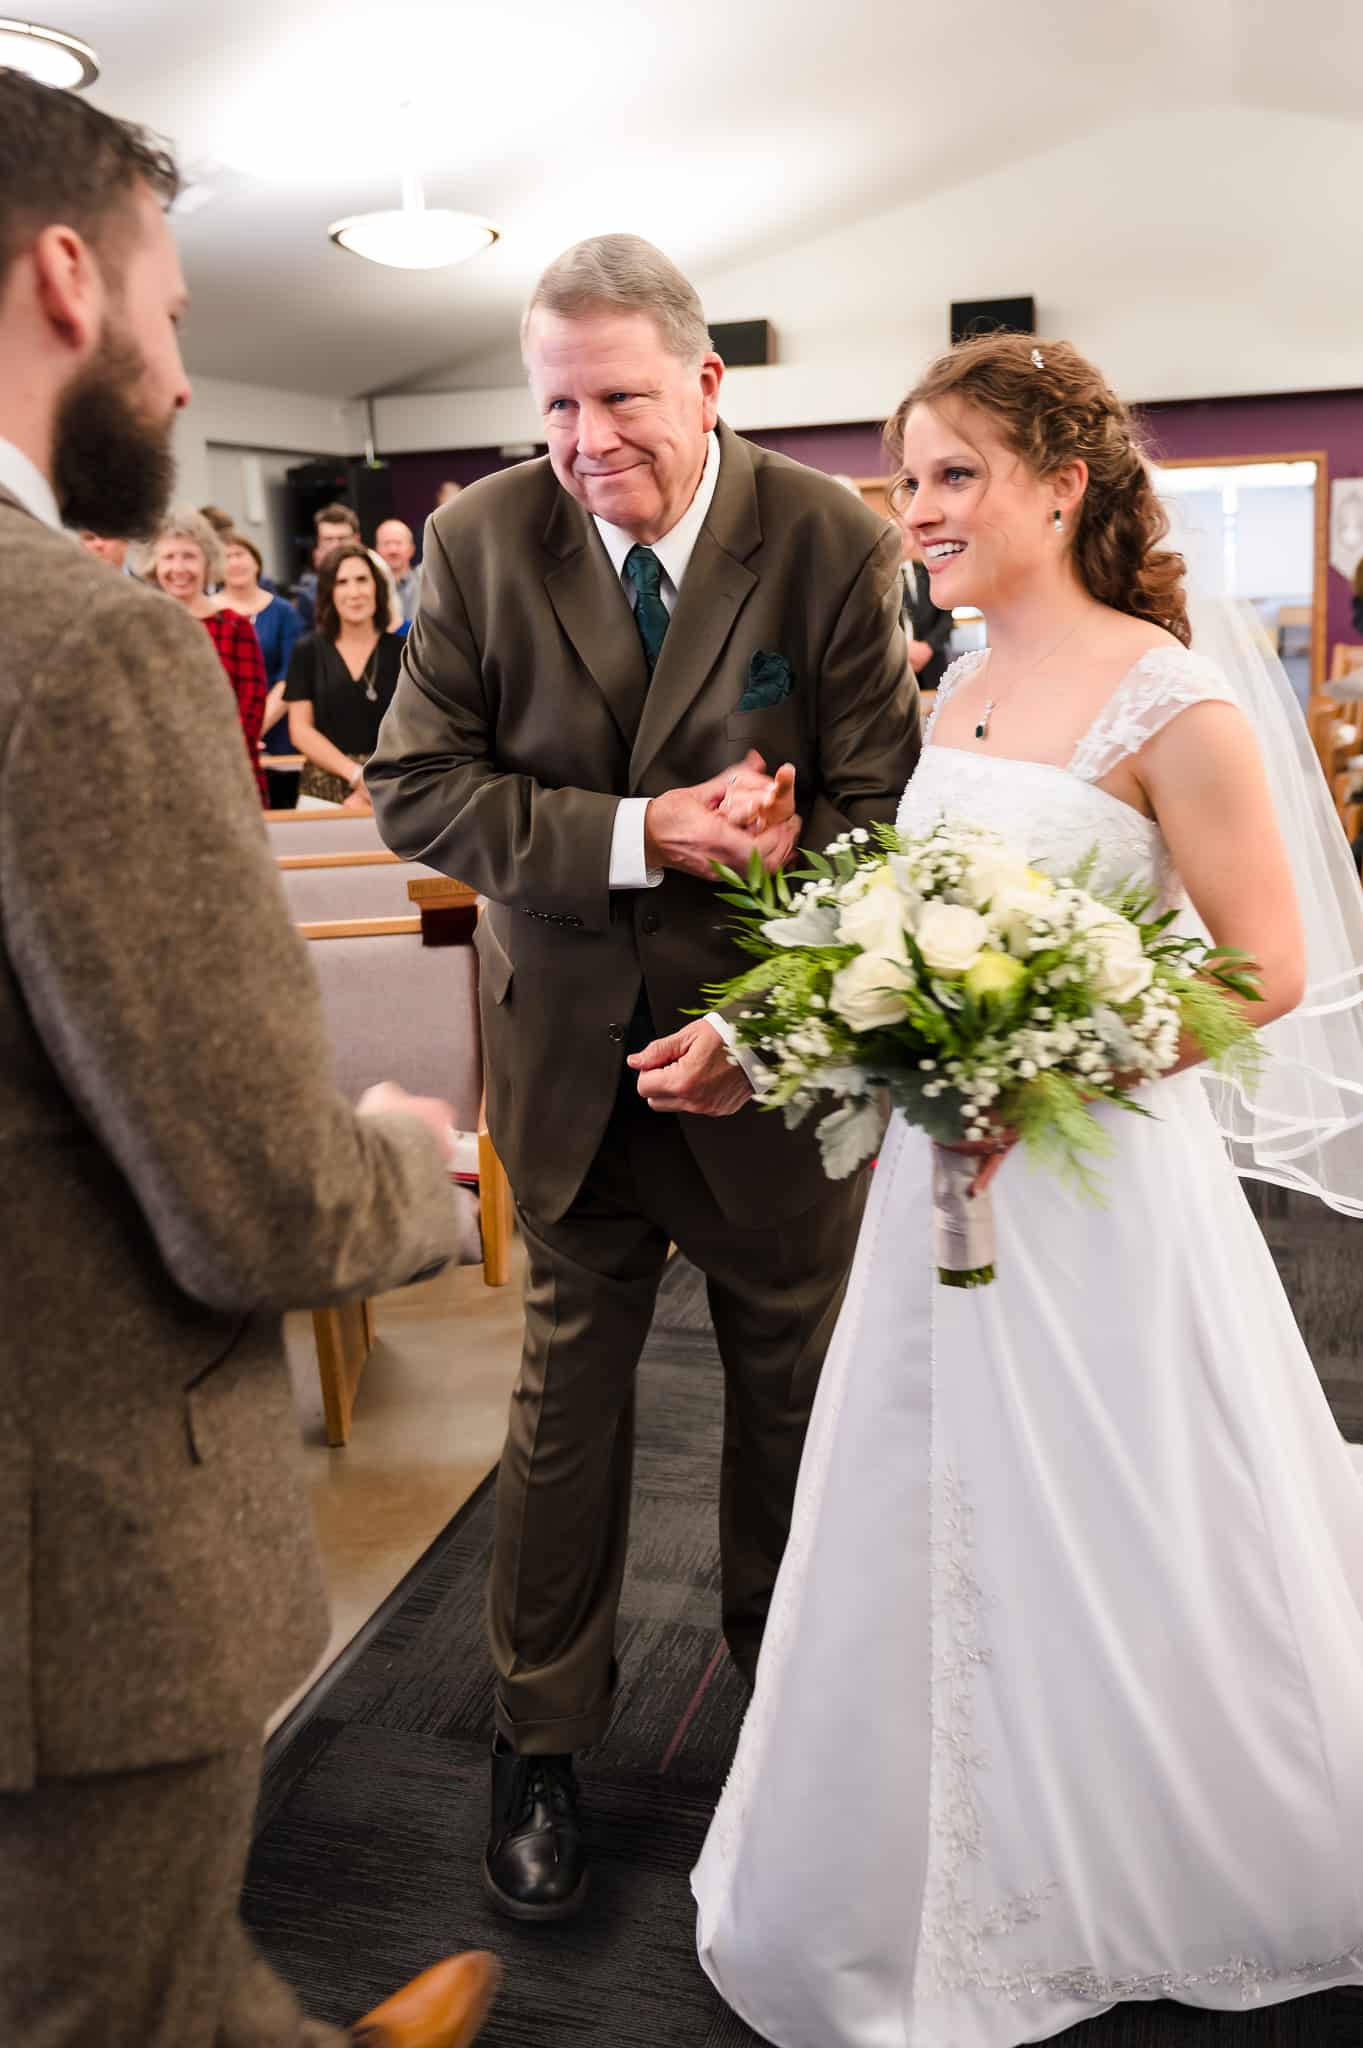 The father of the bride stops with his daughter in front of the groom.